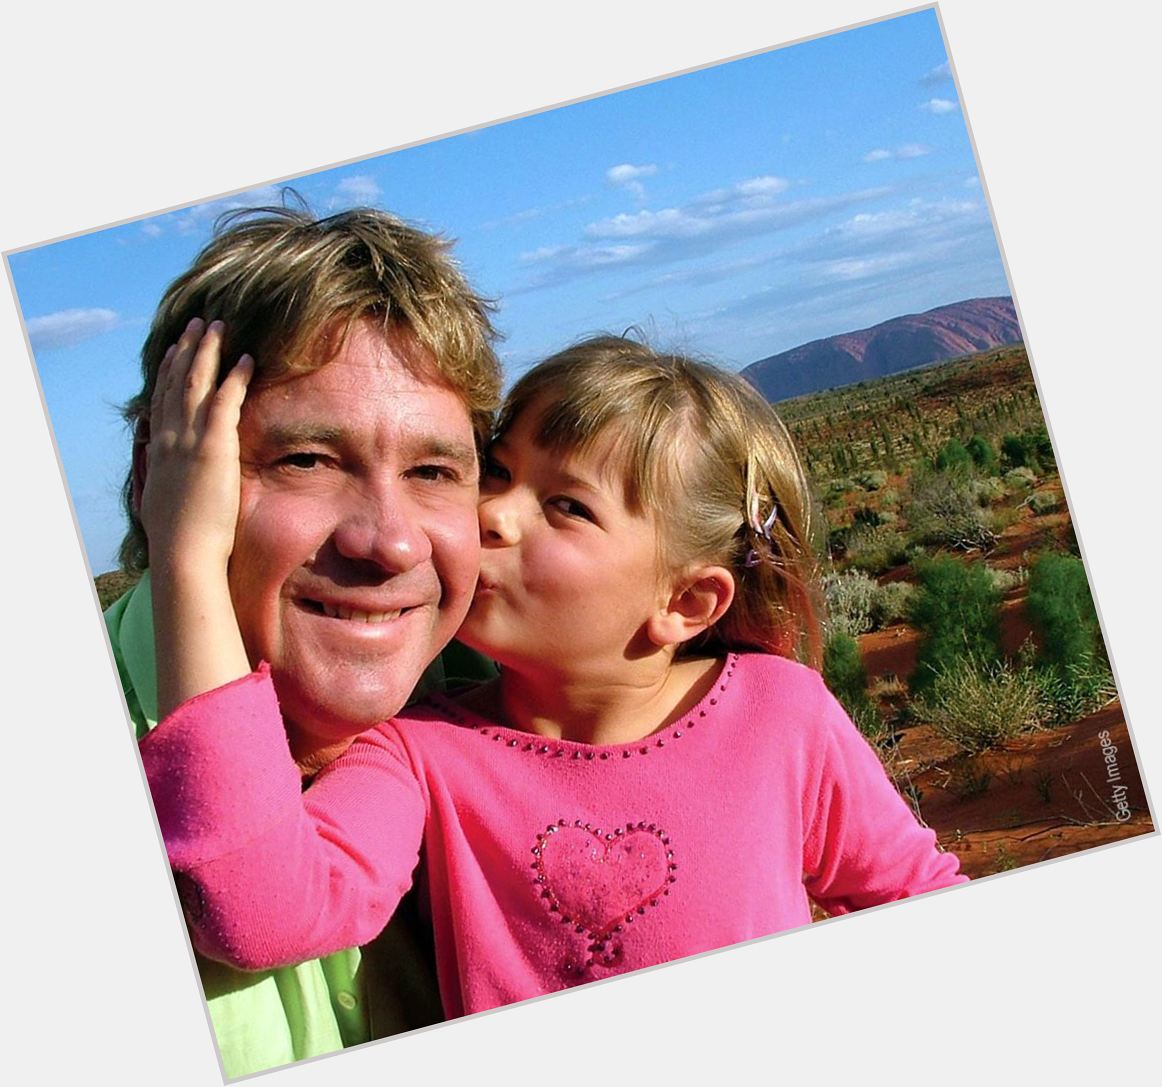   Steve Irwin would have been 53 today. Miss you mate.  Yes we all miss you! Happy Birthday!